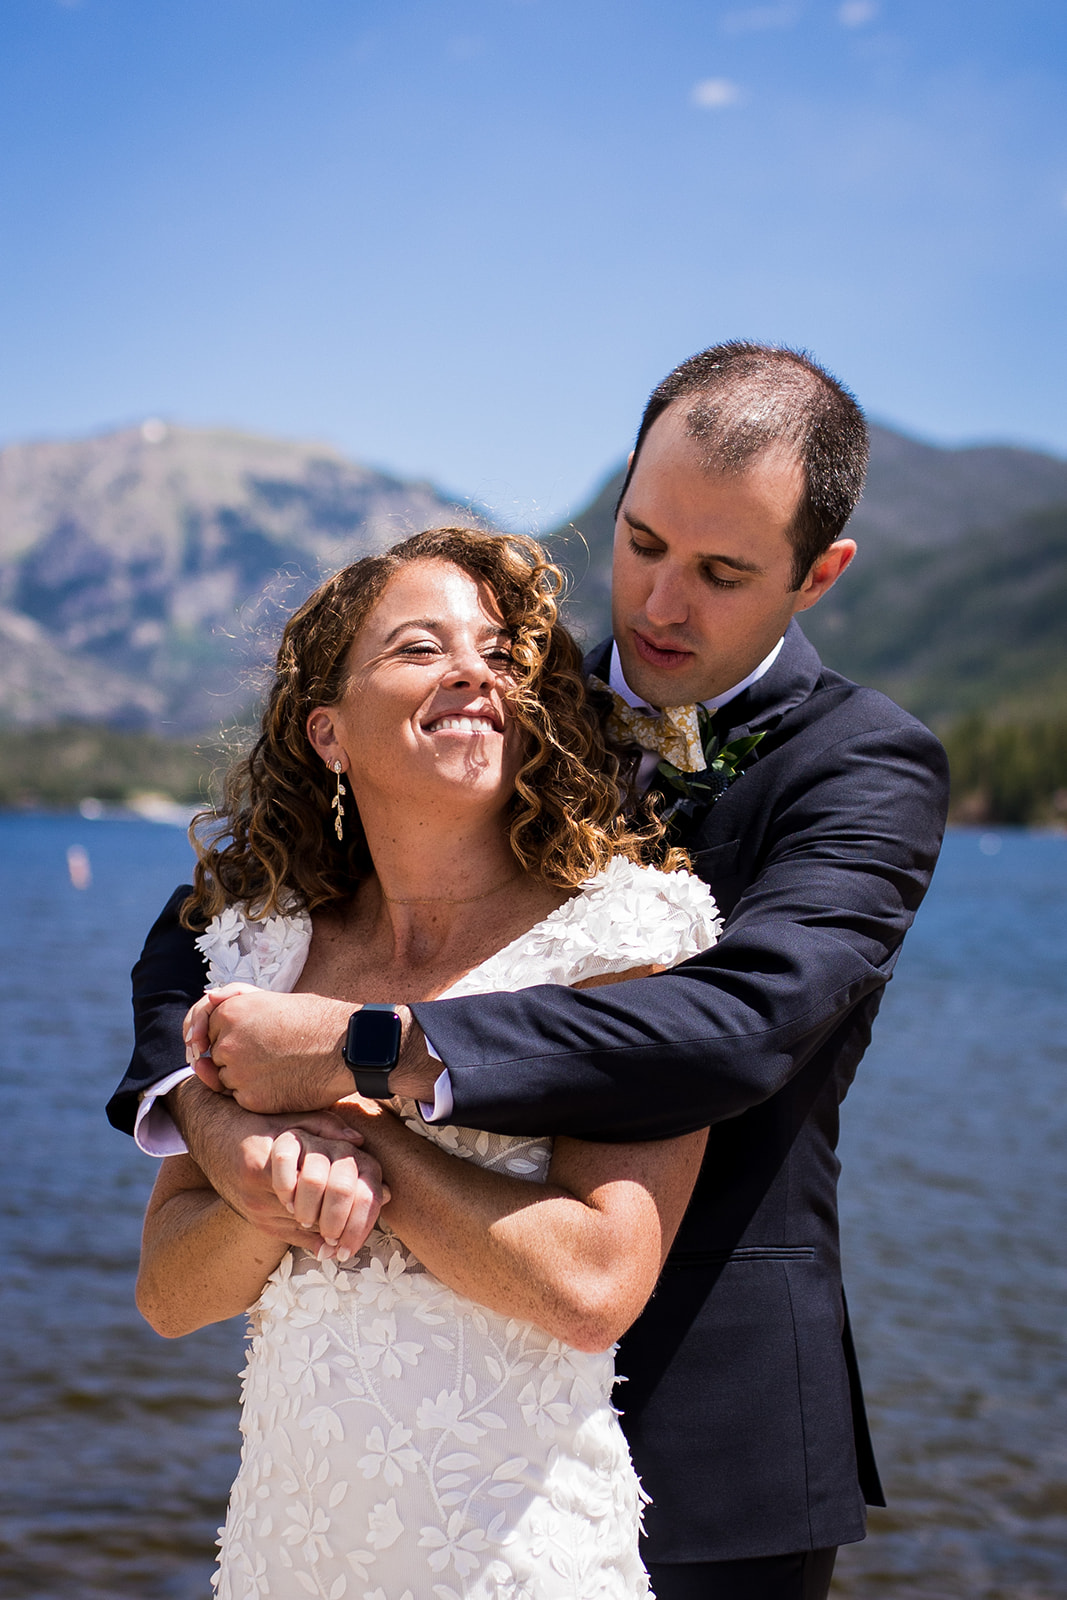 Groom wraps up bride in a hug from behind as the two smile at each other.